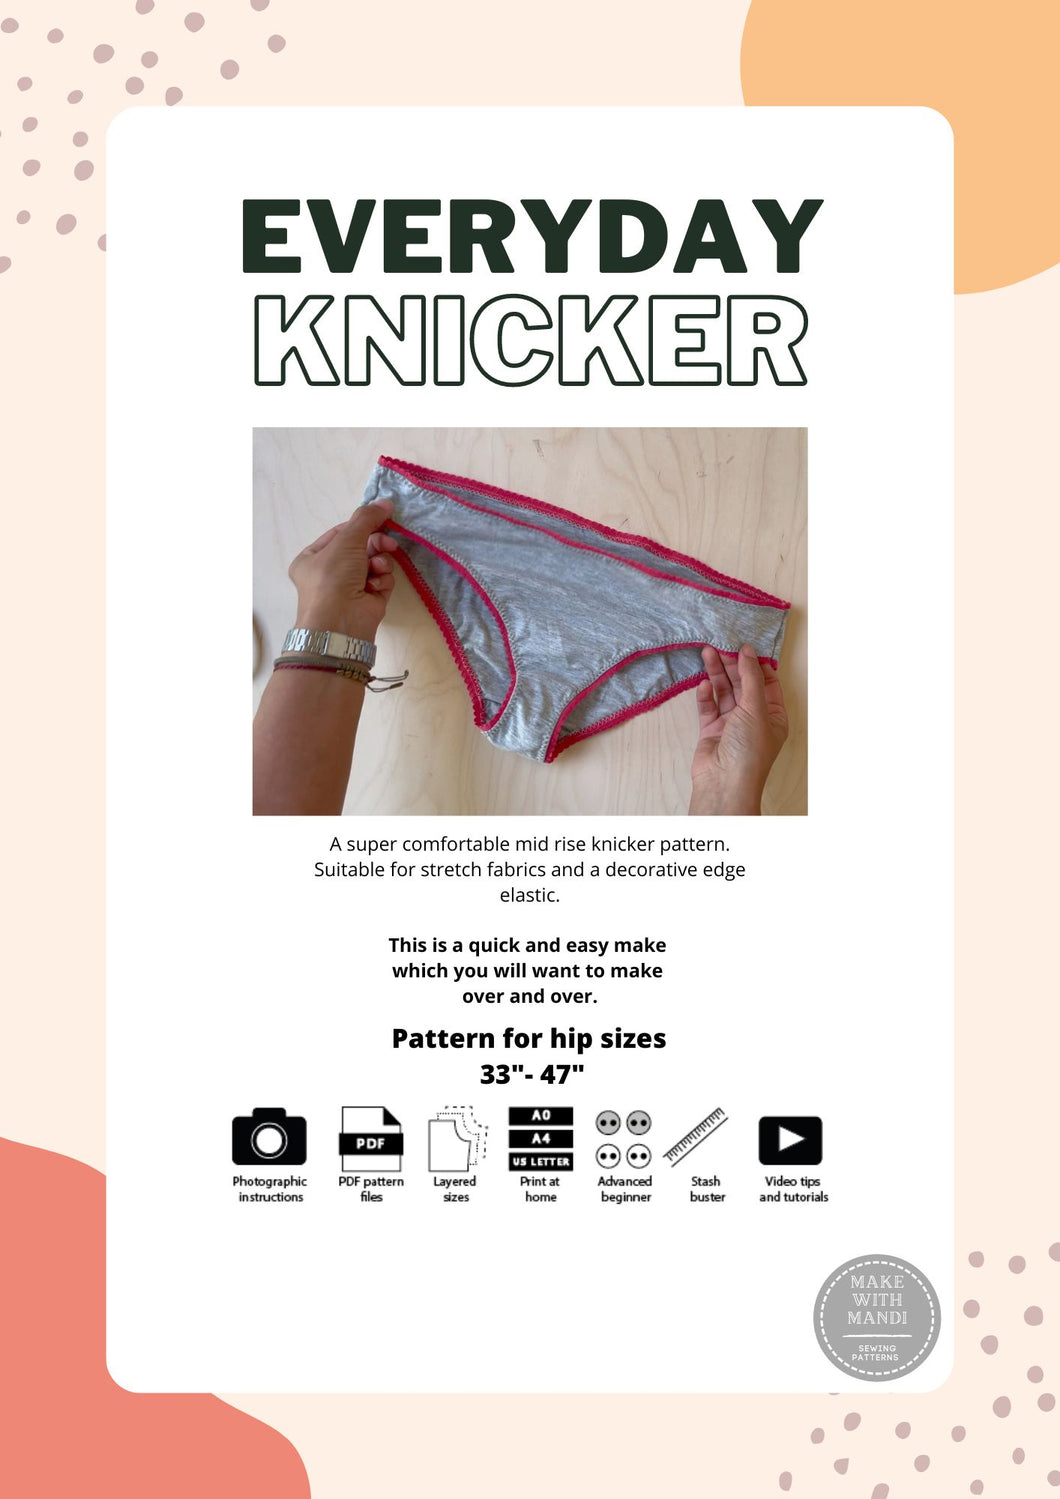 The Everyday Knicker